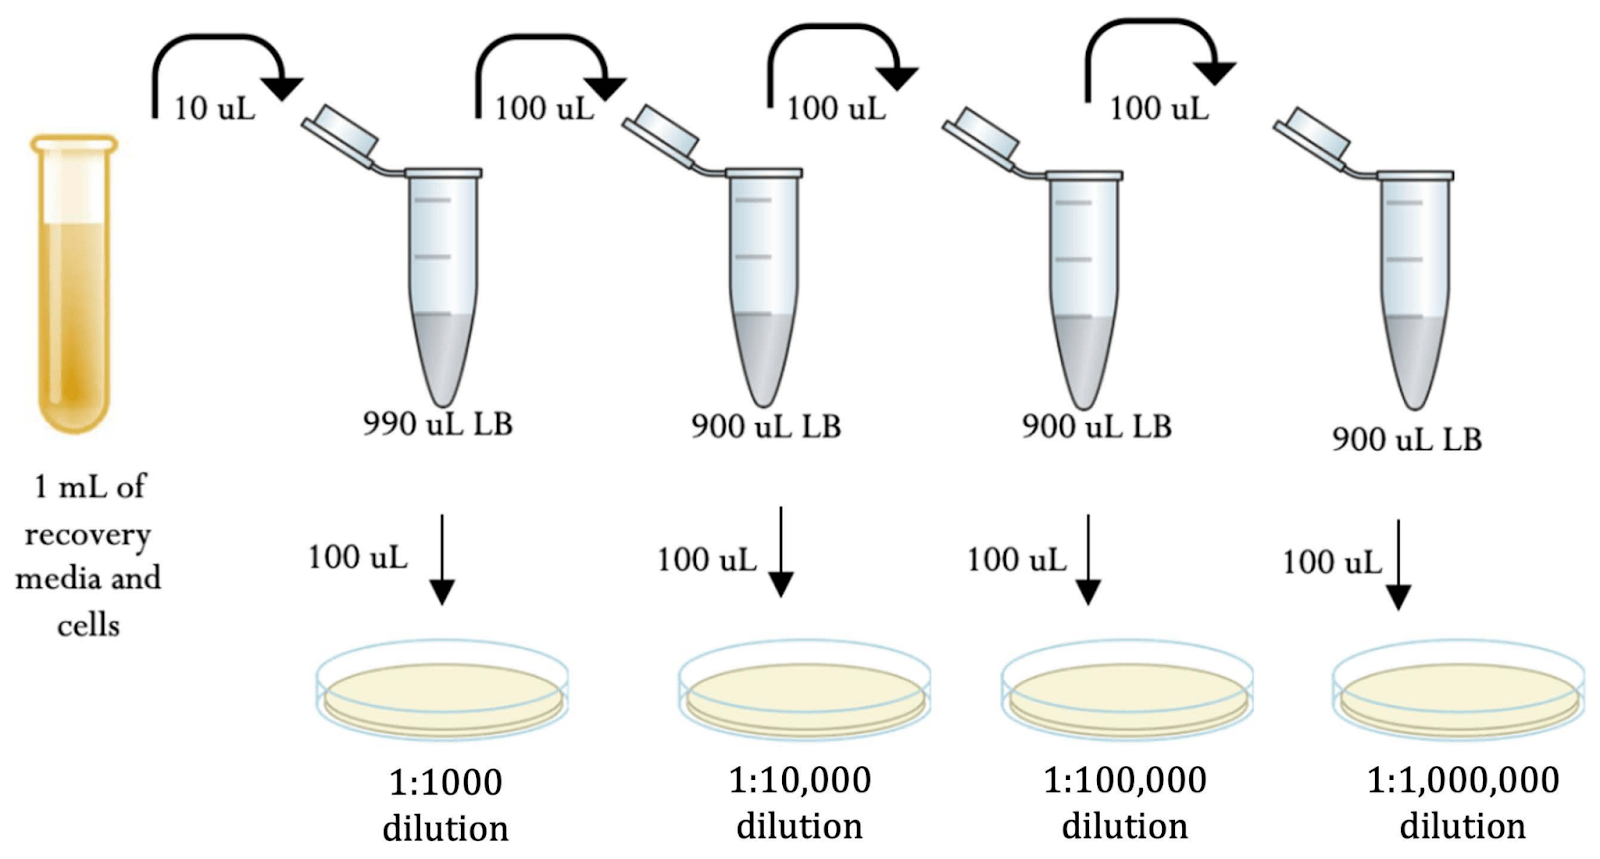 A schematic showing an example of a serial dilution. 10uL is used from an initial 1mL recovery and diluted into 990uL of LB. 100uL of this first dilution is plated for a 1:1000 dilution. 100uL from this first dilution are then diluted into another 900uL. 100uL of the second dilution is plated for a 1:10,000 dilution. This process is repeated twice more for 1:100,000 and 1:1,000,000 dilutions